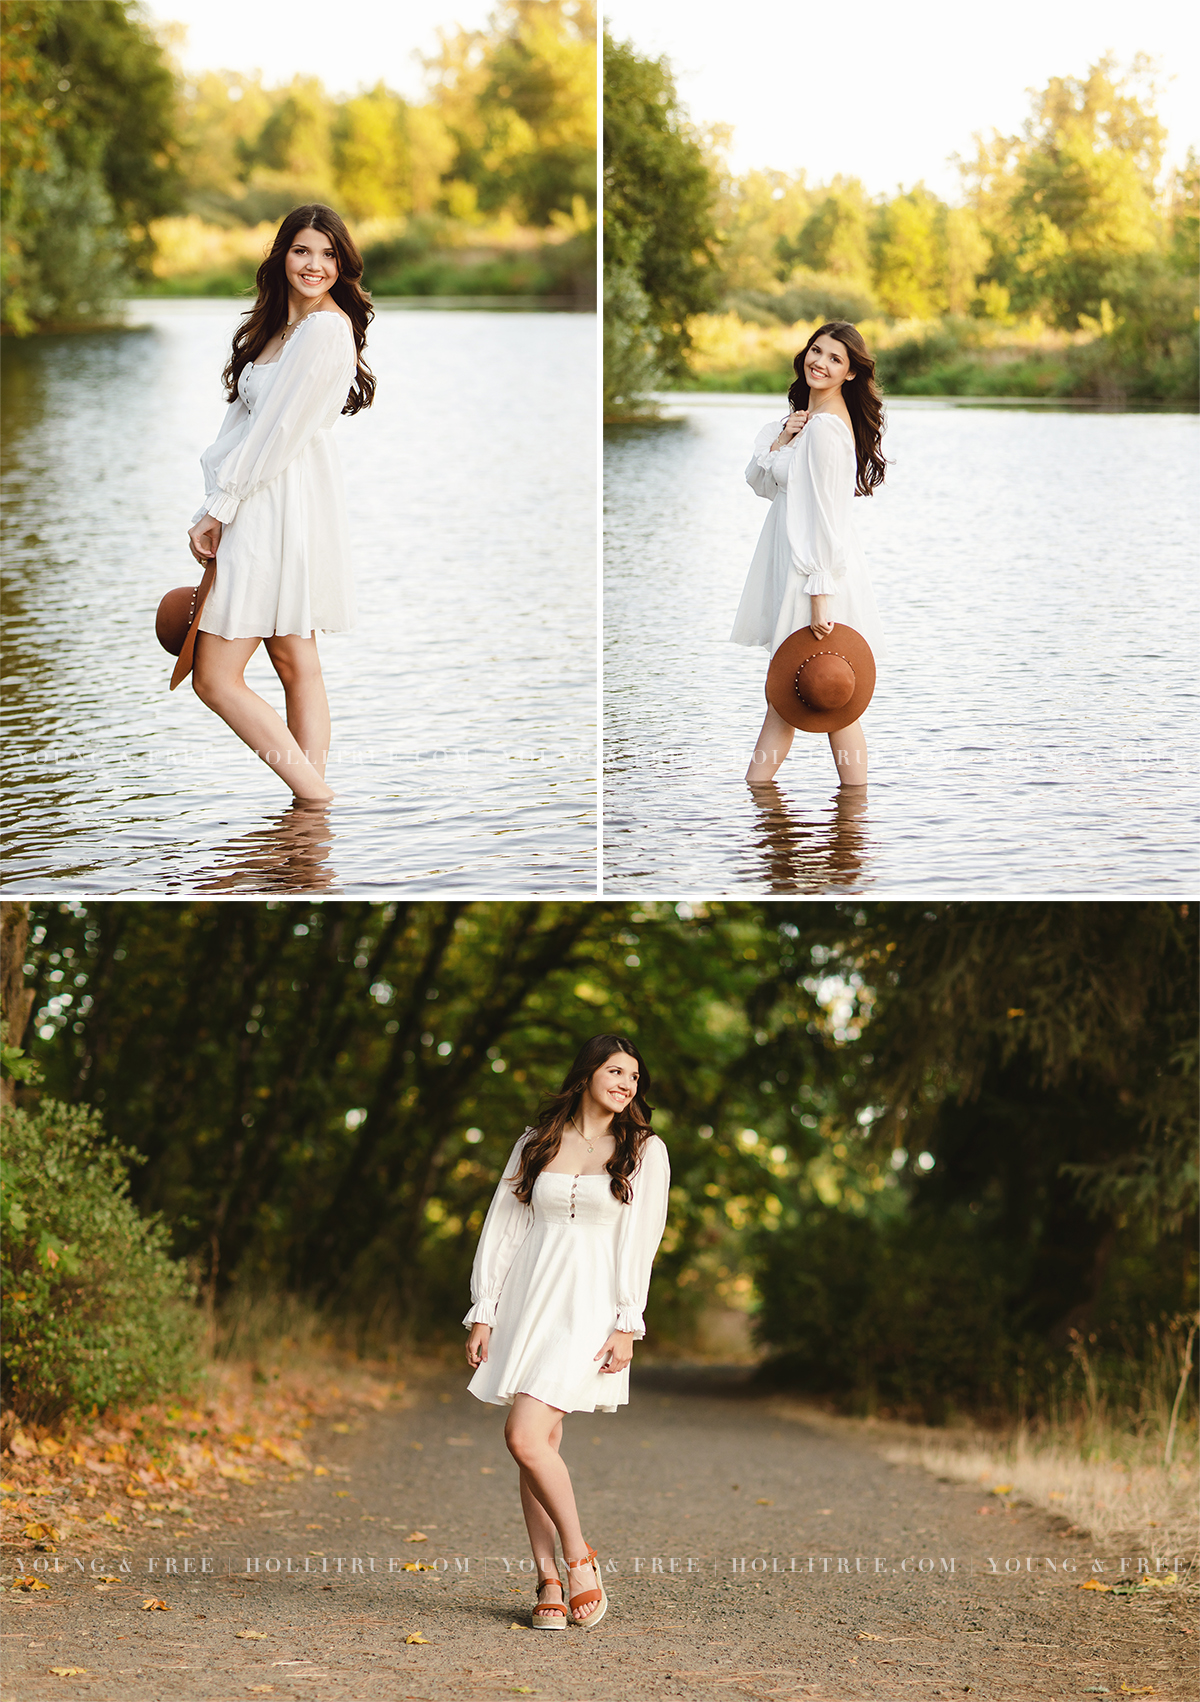 Senior pictures in a river at sunset by Oregon Senior Photographer, Holli True